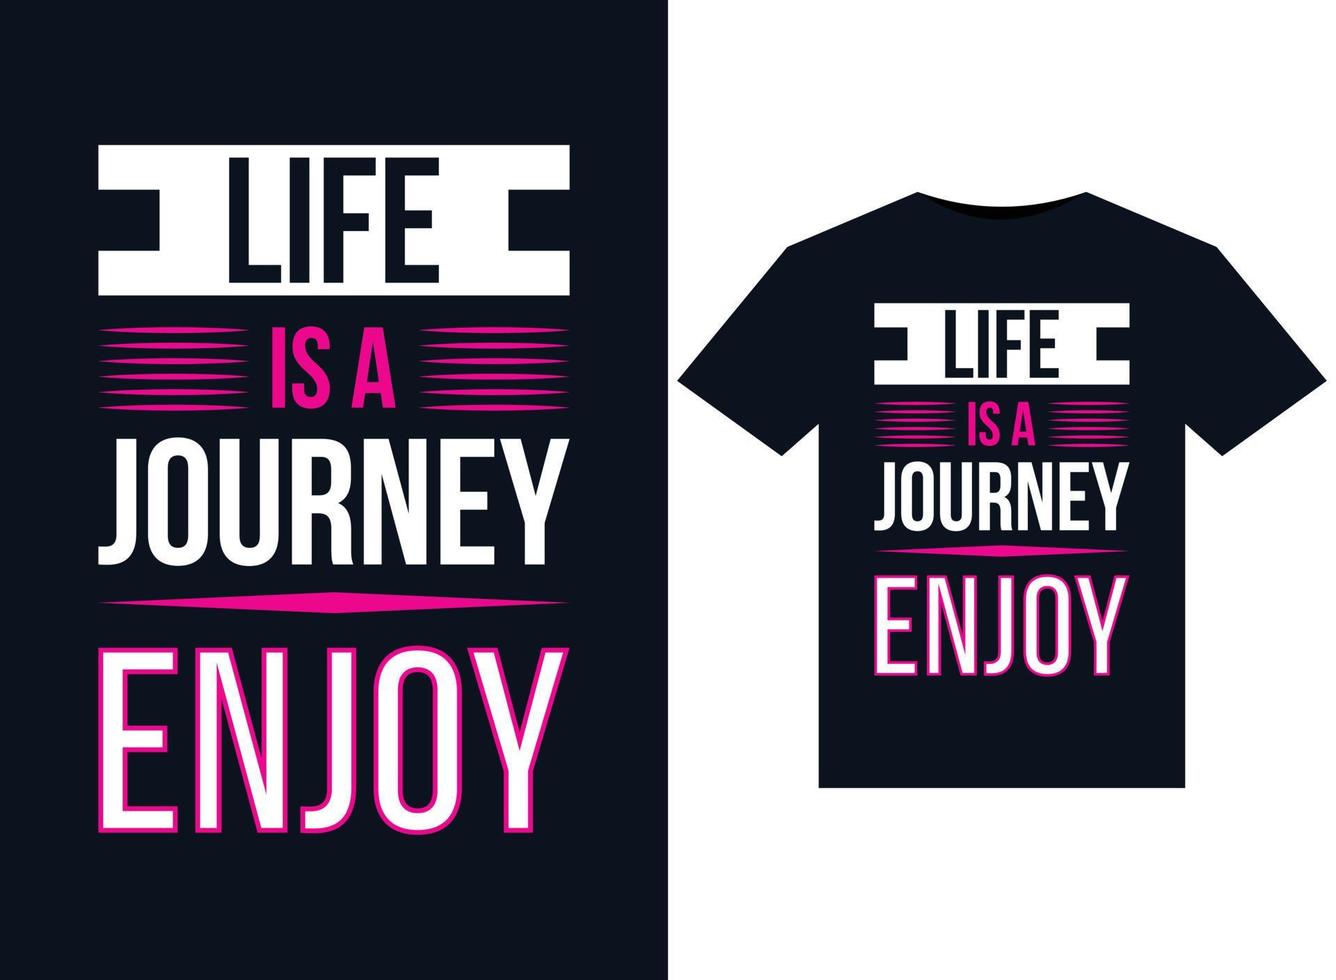 Life is a journey enjoy illustrations for print-ready T-Shirts design vector